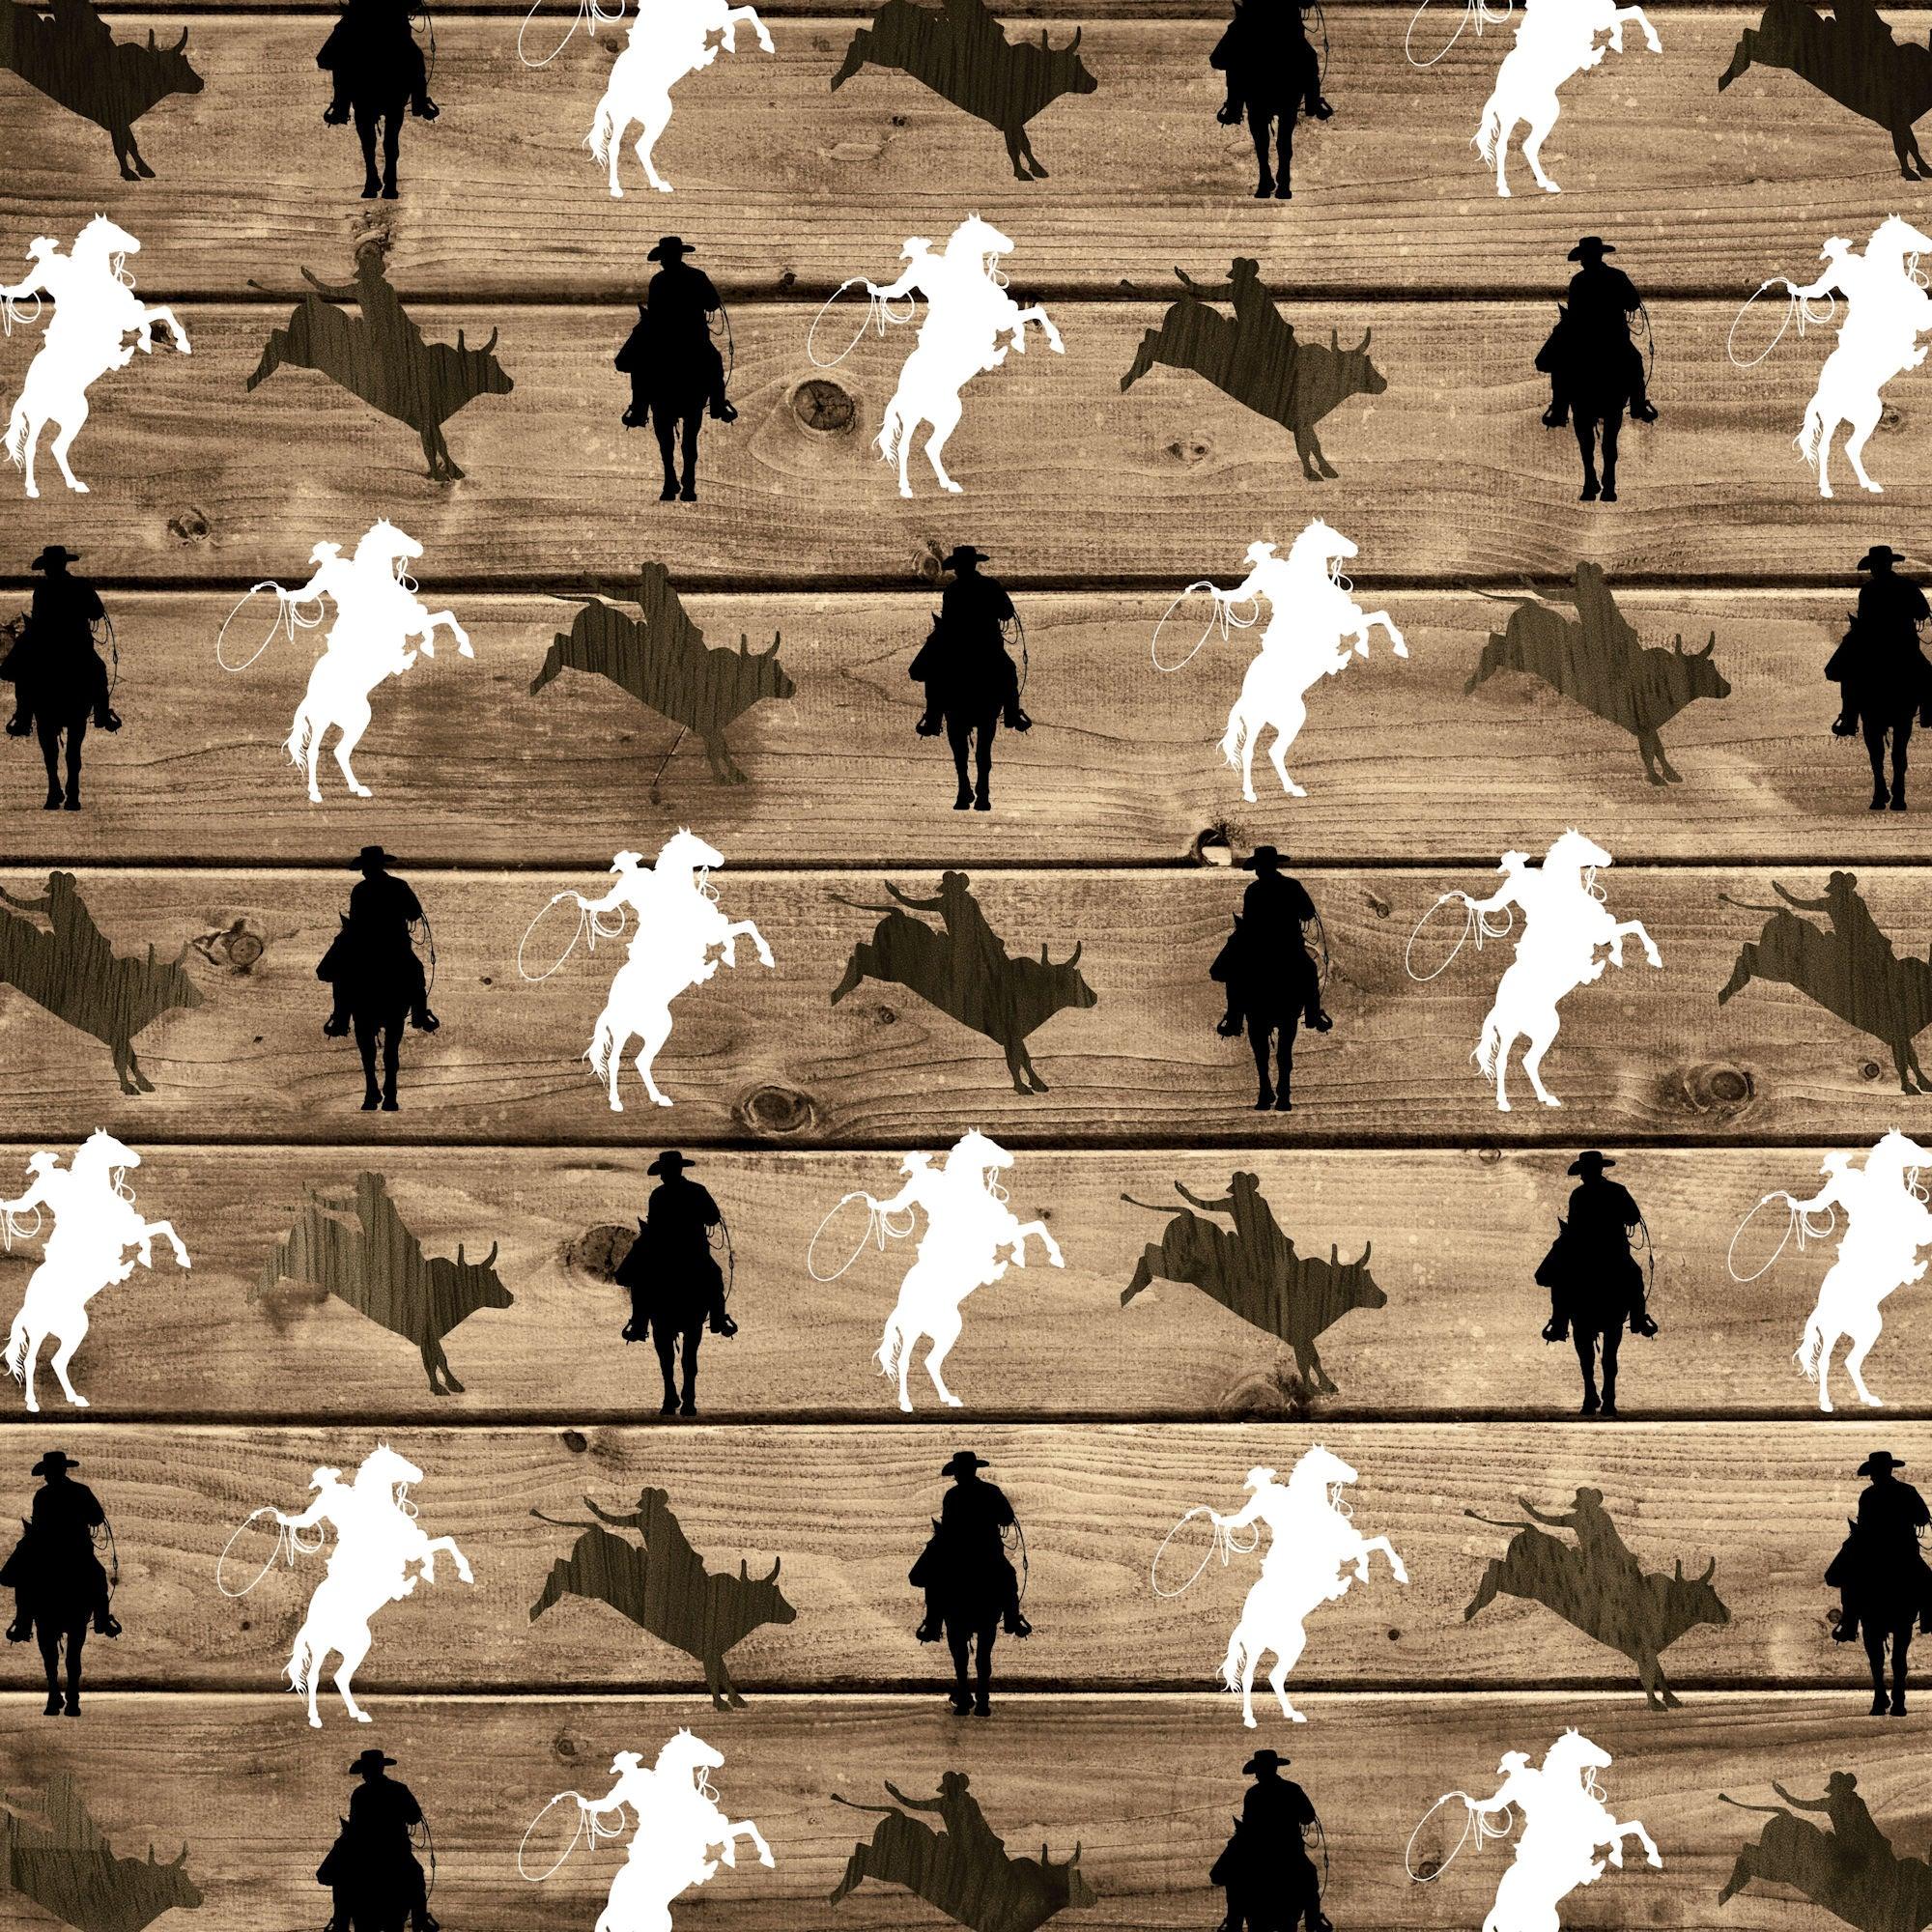 Cowboys Collection Cowboy Up 12 x 12 Double-Sided Scrapbook Paper by SSC Designs